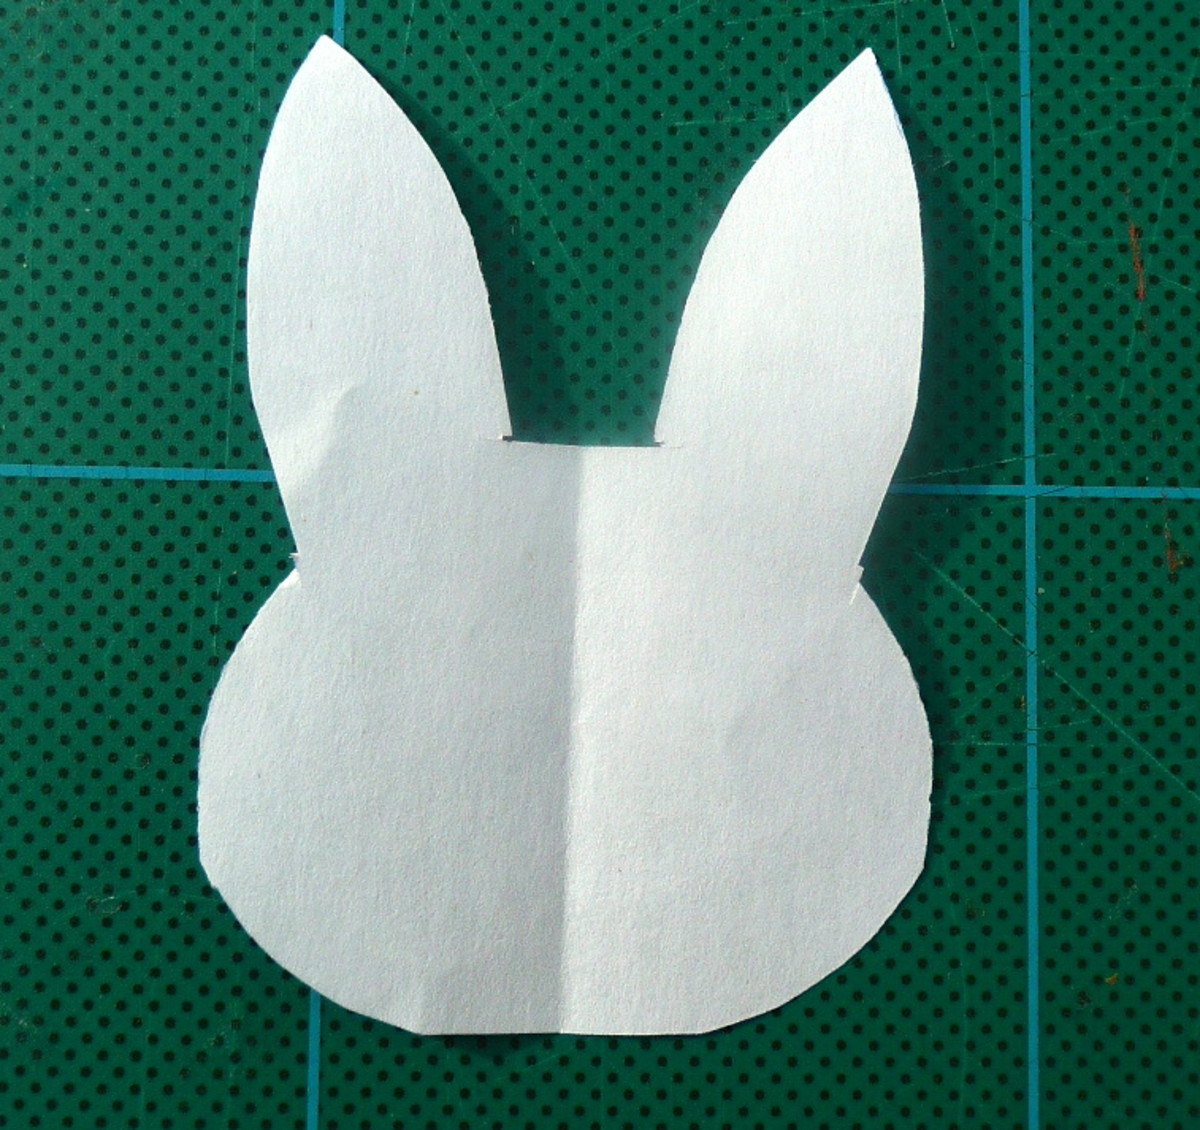 Cut out the paper template.